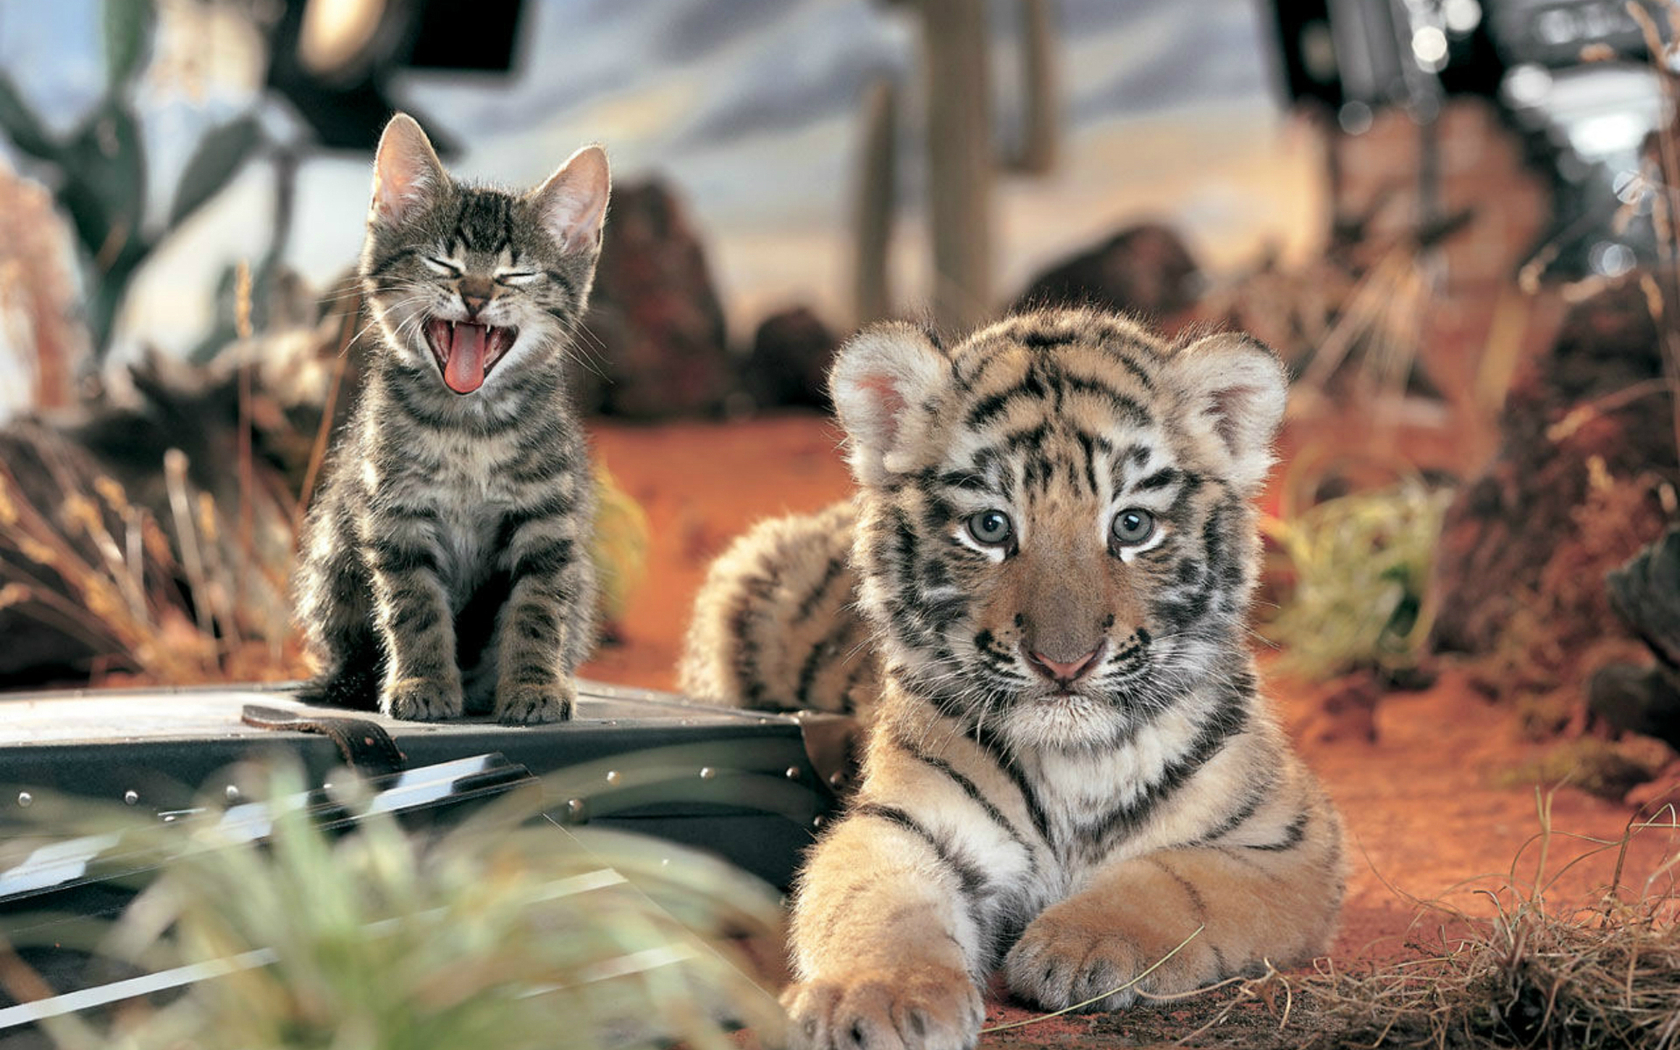 The Tiger and the Kitten wallpaper | HD Wallpapers